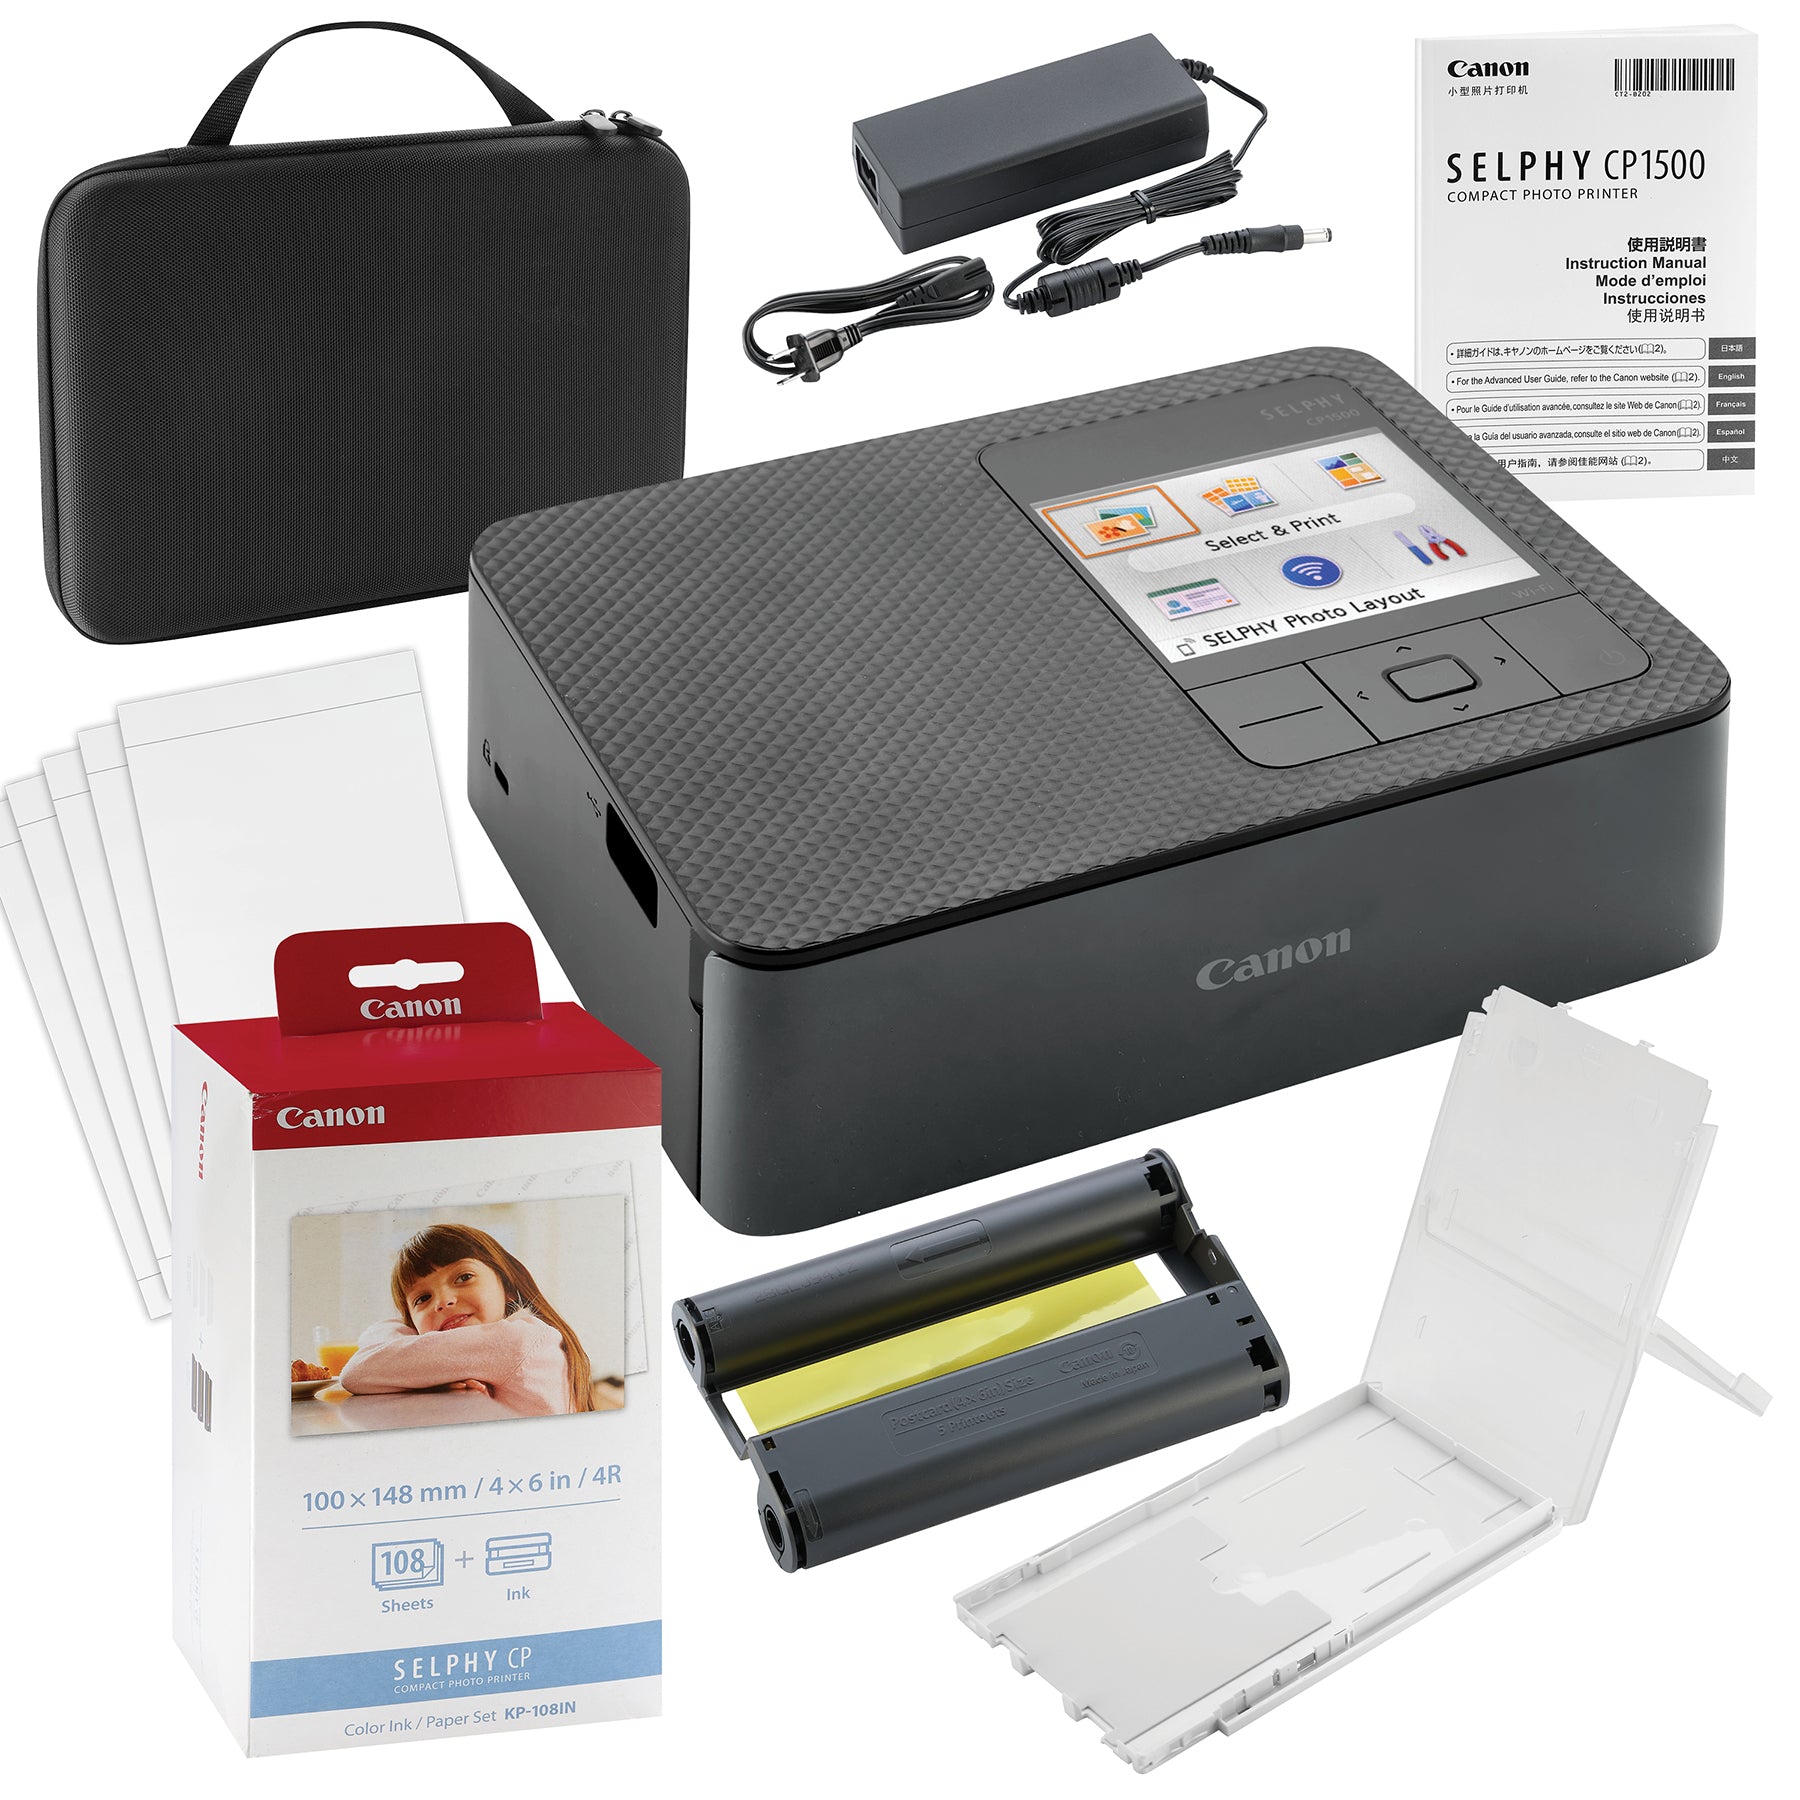 Canon SELPHY CP1500 Wireless Compact Photo Printer with AirPrint and Mopria Device Printing, Black, With Canon KP108 Paper And Black hard case to fit all together